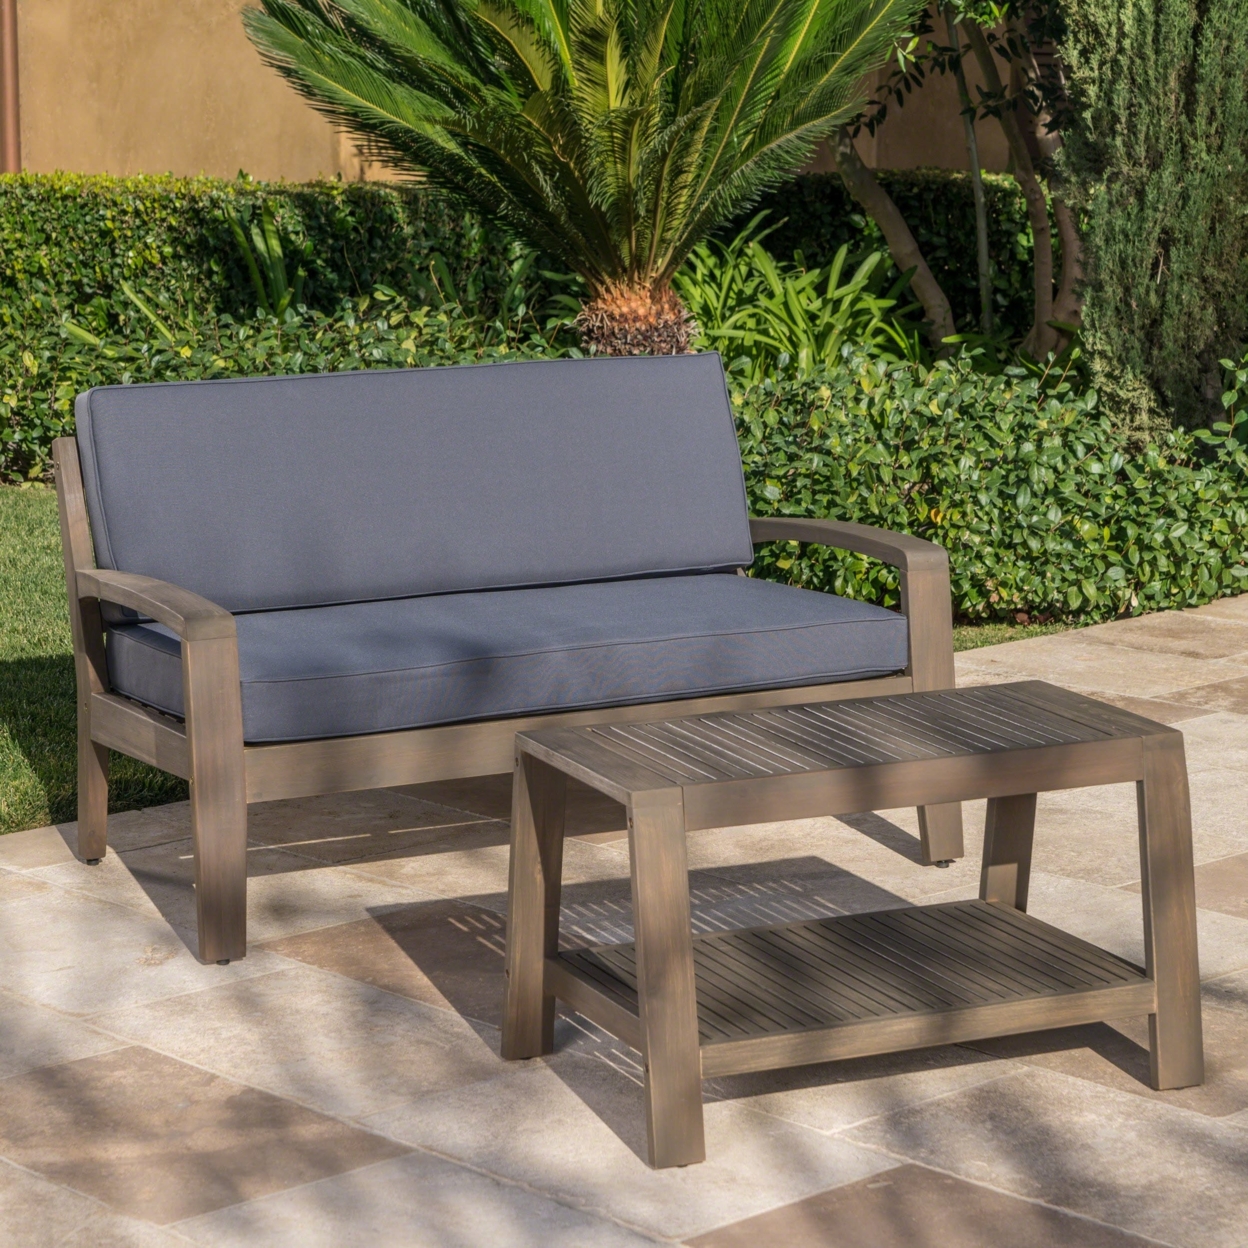 Christian Outdoor Acacia Wood Loveseat And Coffee Table Set With Cushions - Gray Finish/dark Gray